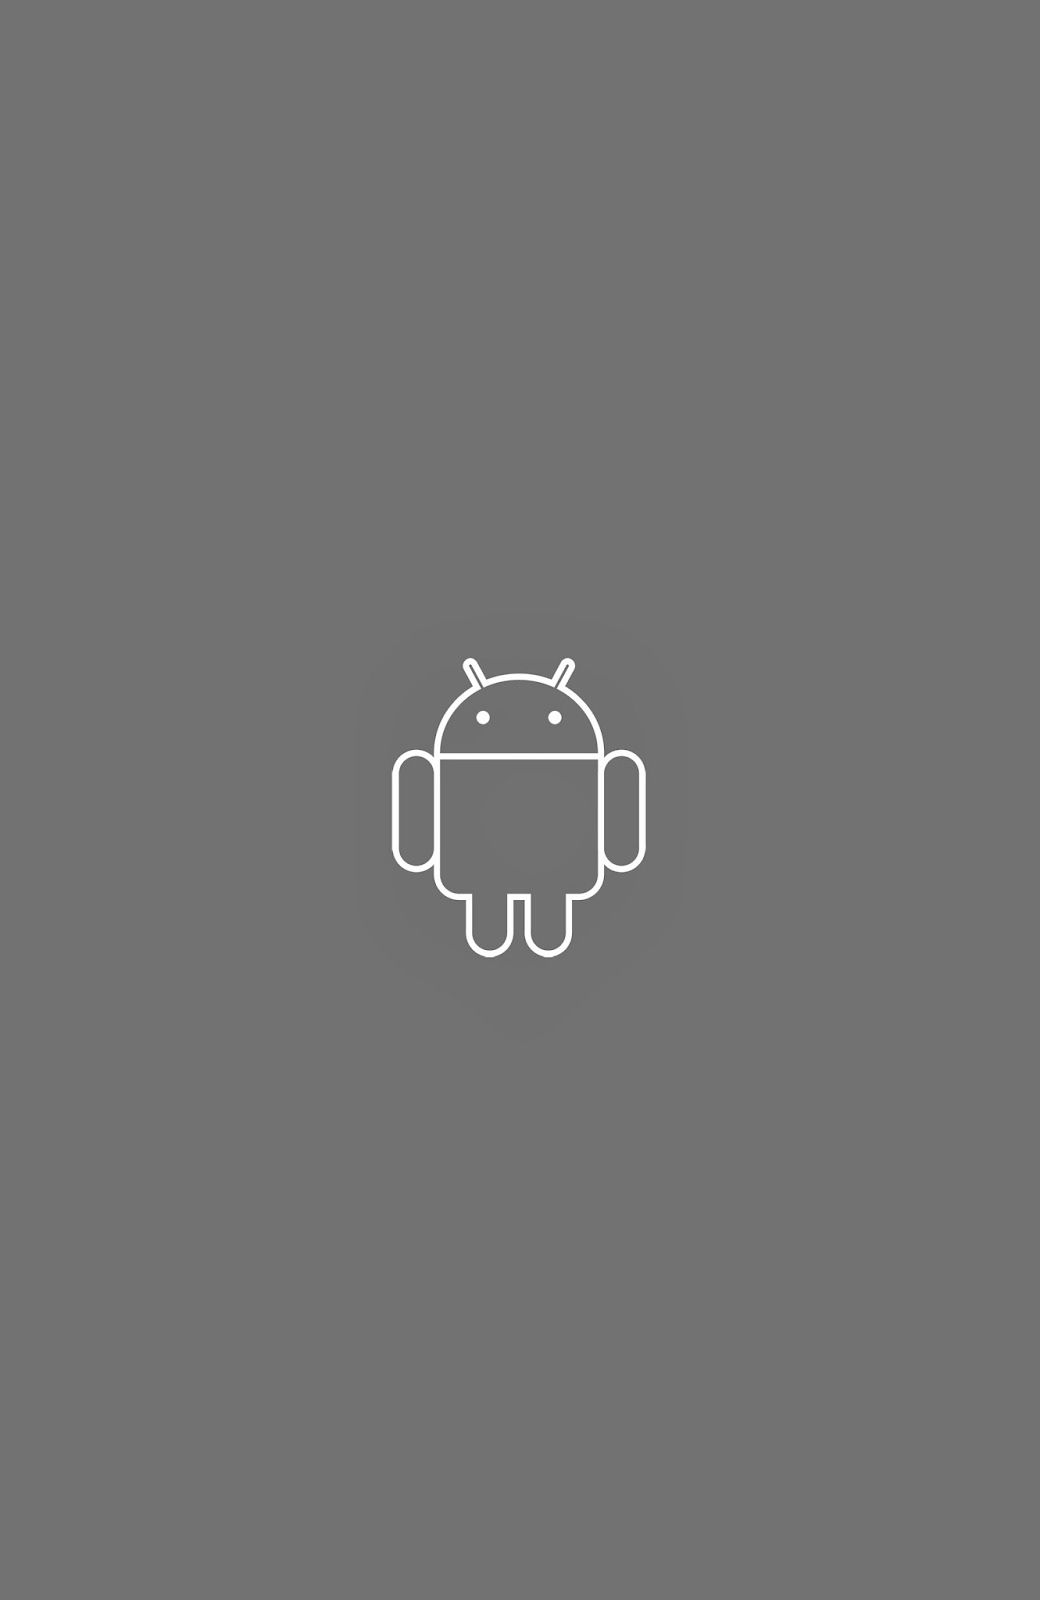 FruityMixer's Wallpaper: Android simple wallpaper gray background